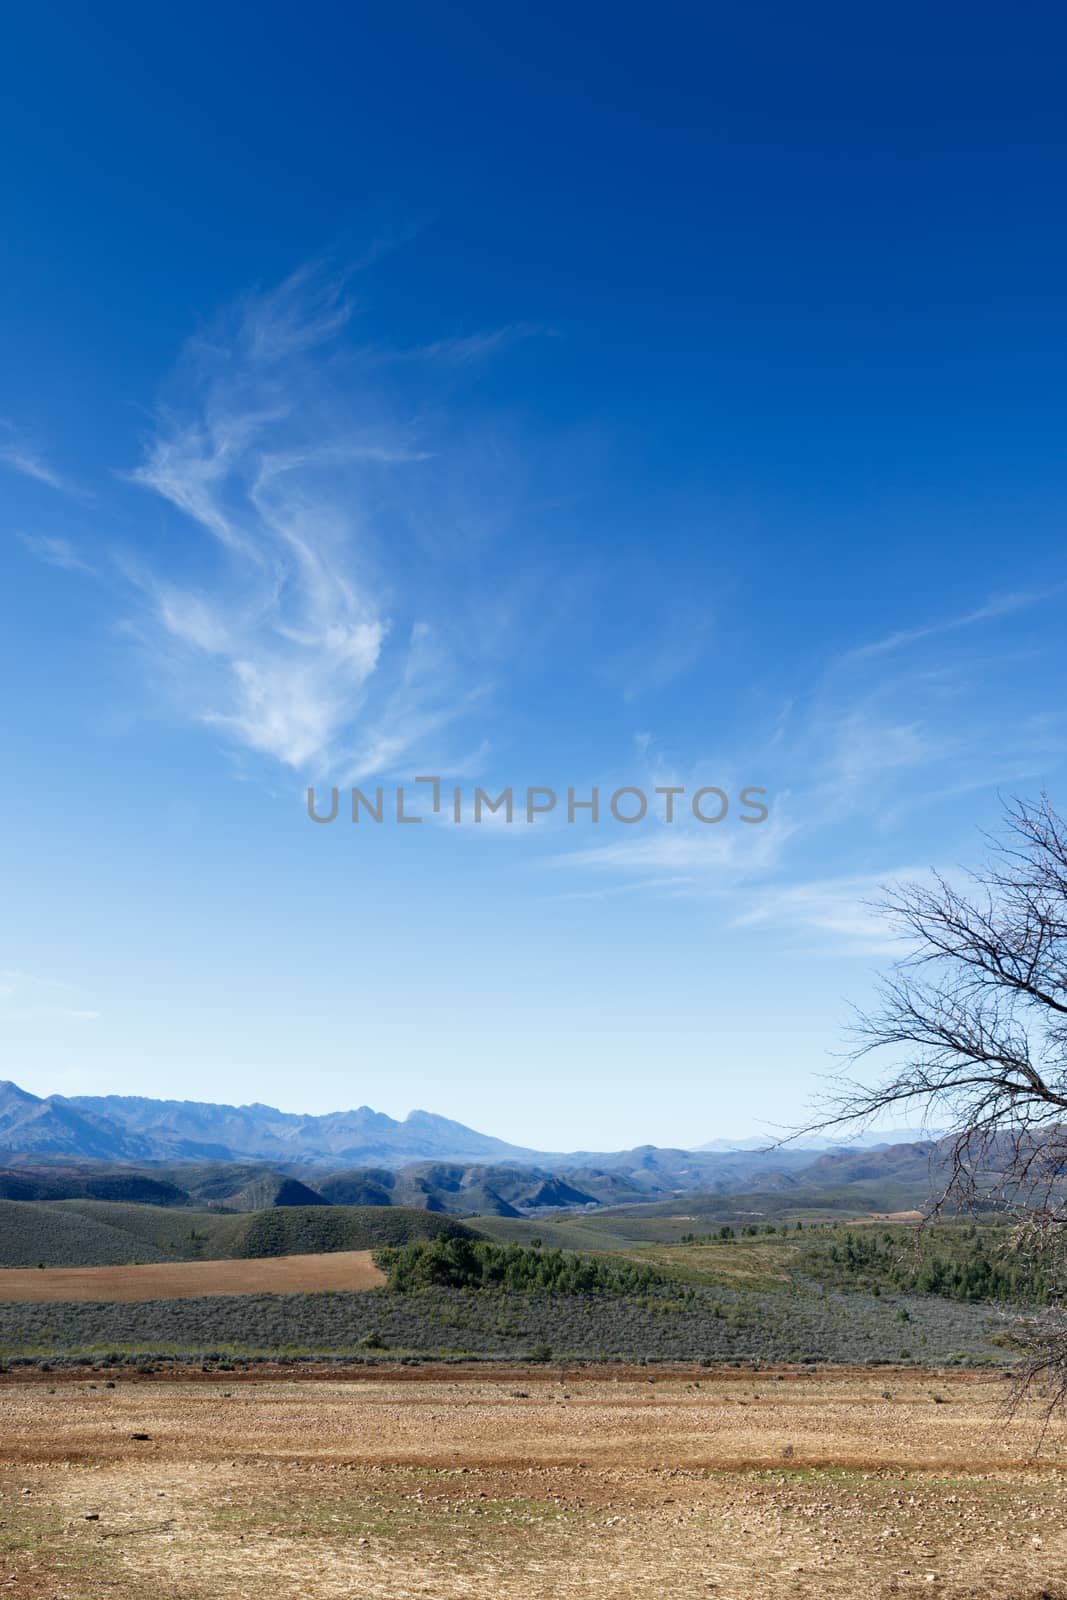 Clouds are talking - The Swartberg mountains are a mountain range in the Western Cape province of South Africa. It is composed of two main mountain chains running roughly east-west along the northern edge of the semi-arid Little Karoo.